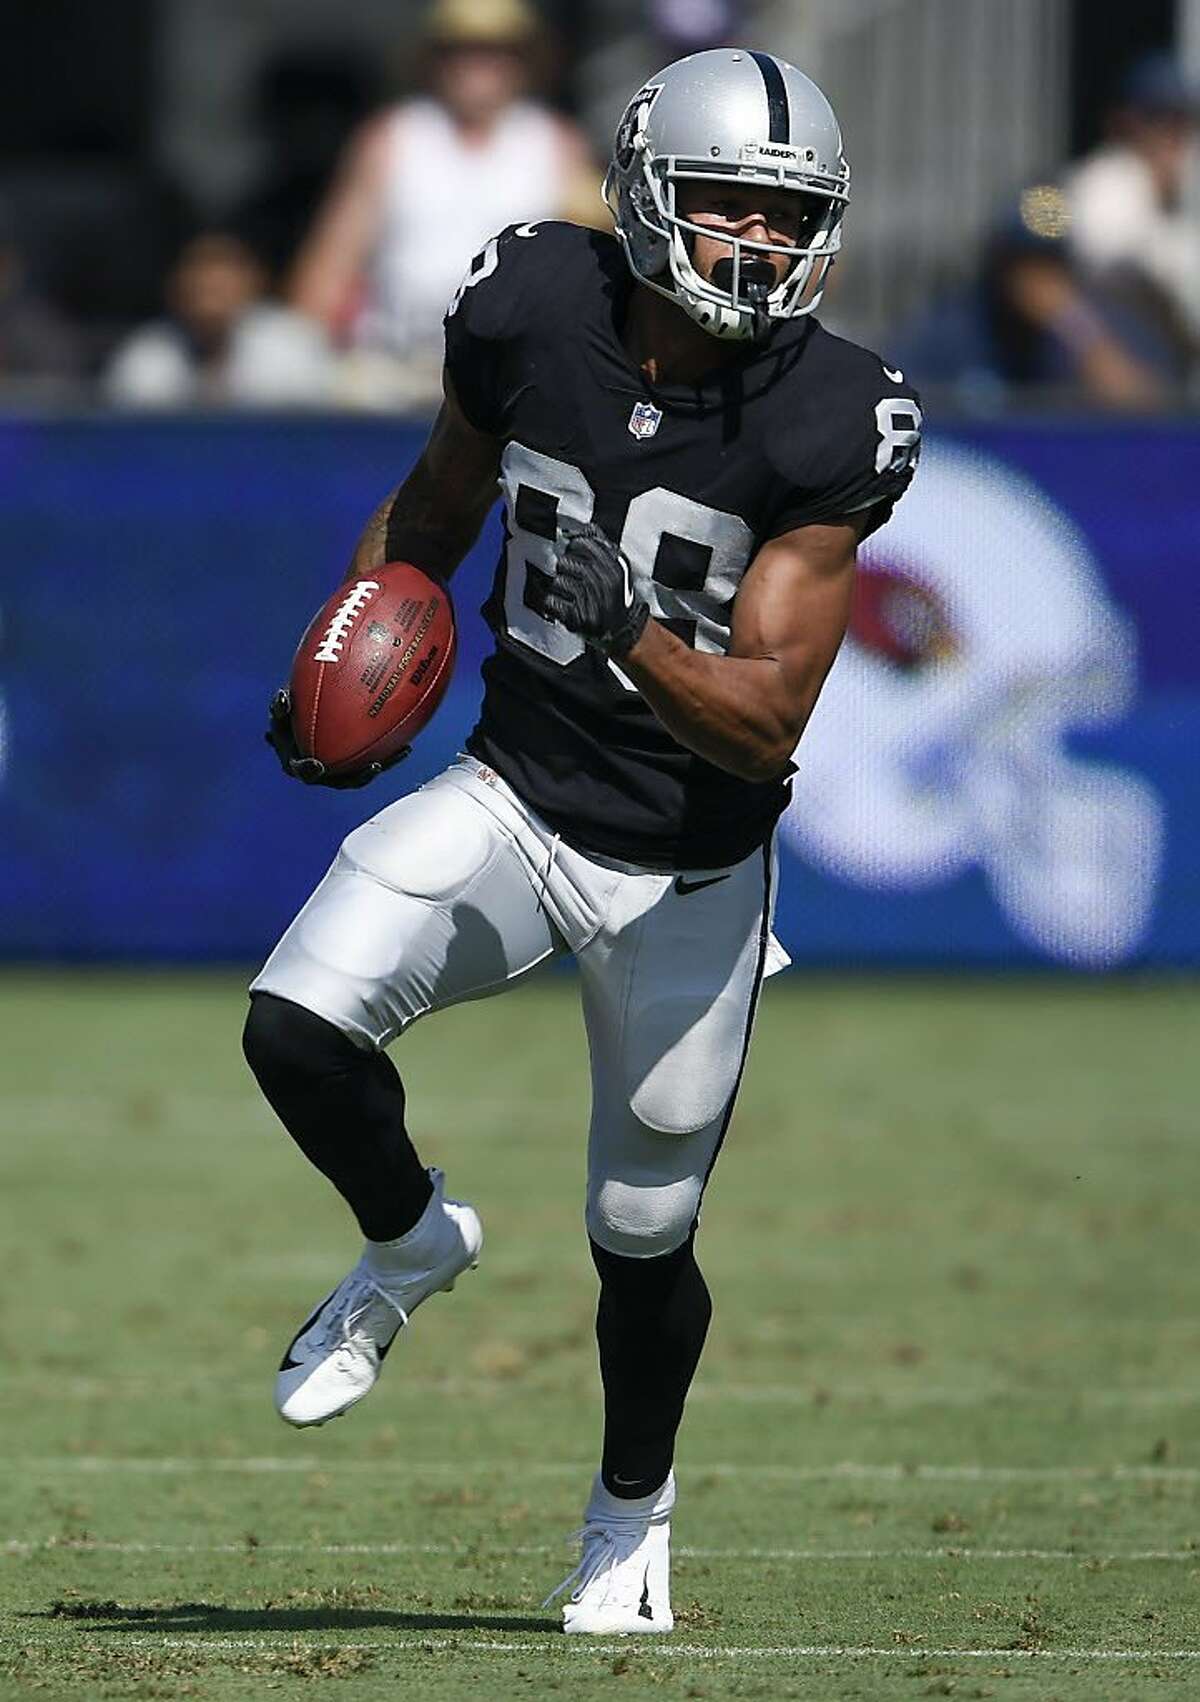 Oakland Raiders wide receiver Marcell Ateman in action during the second half in an NFL preseason football game against the Los Angeles Rams Saturday, Aug. 18, 2018, in Los Angeles. (AP Photo/Kelvin Kuo)